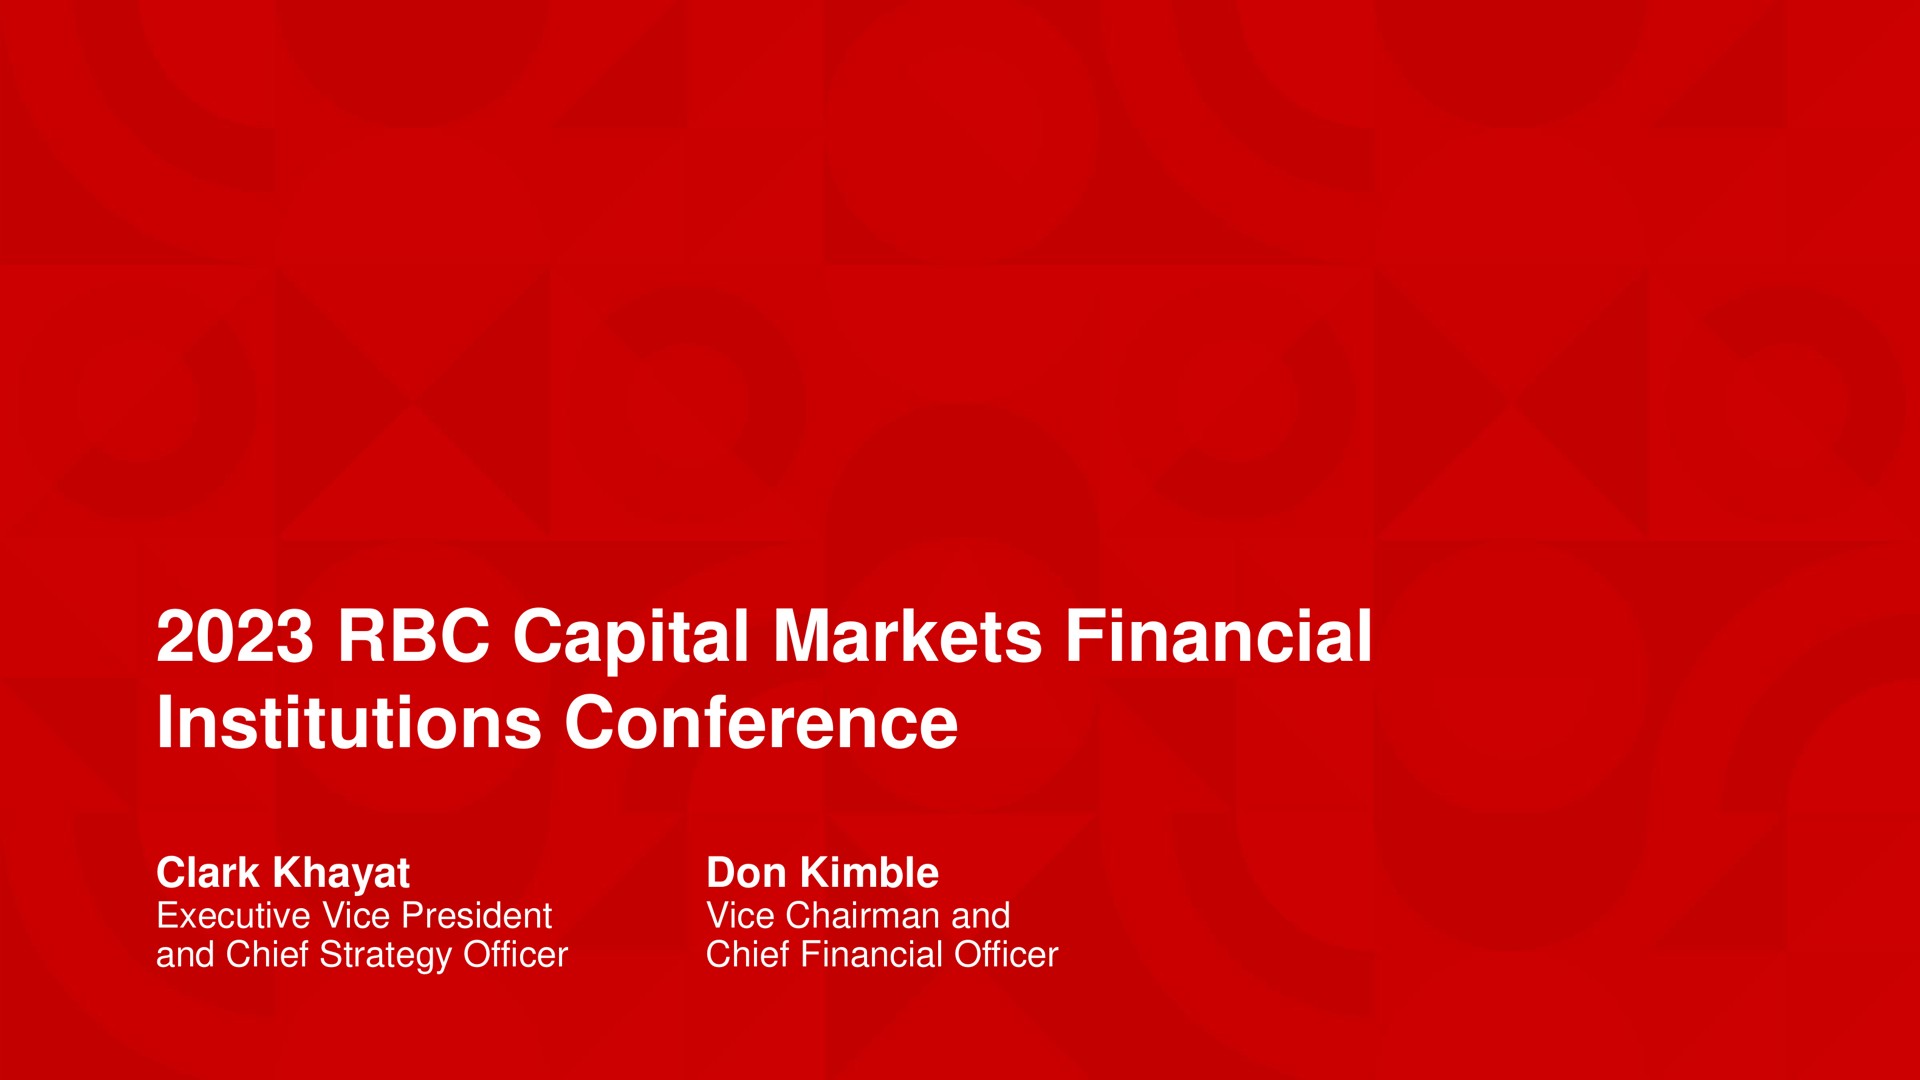 capital markets financial institutions conference clark executive vice president and chief strategy officer don vice chairman and chief financial officer or a are | KeyCorp